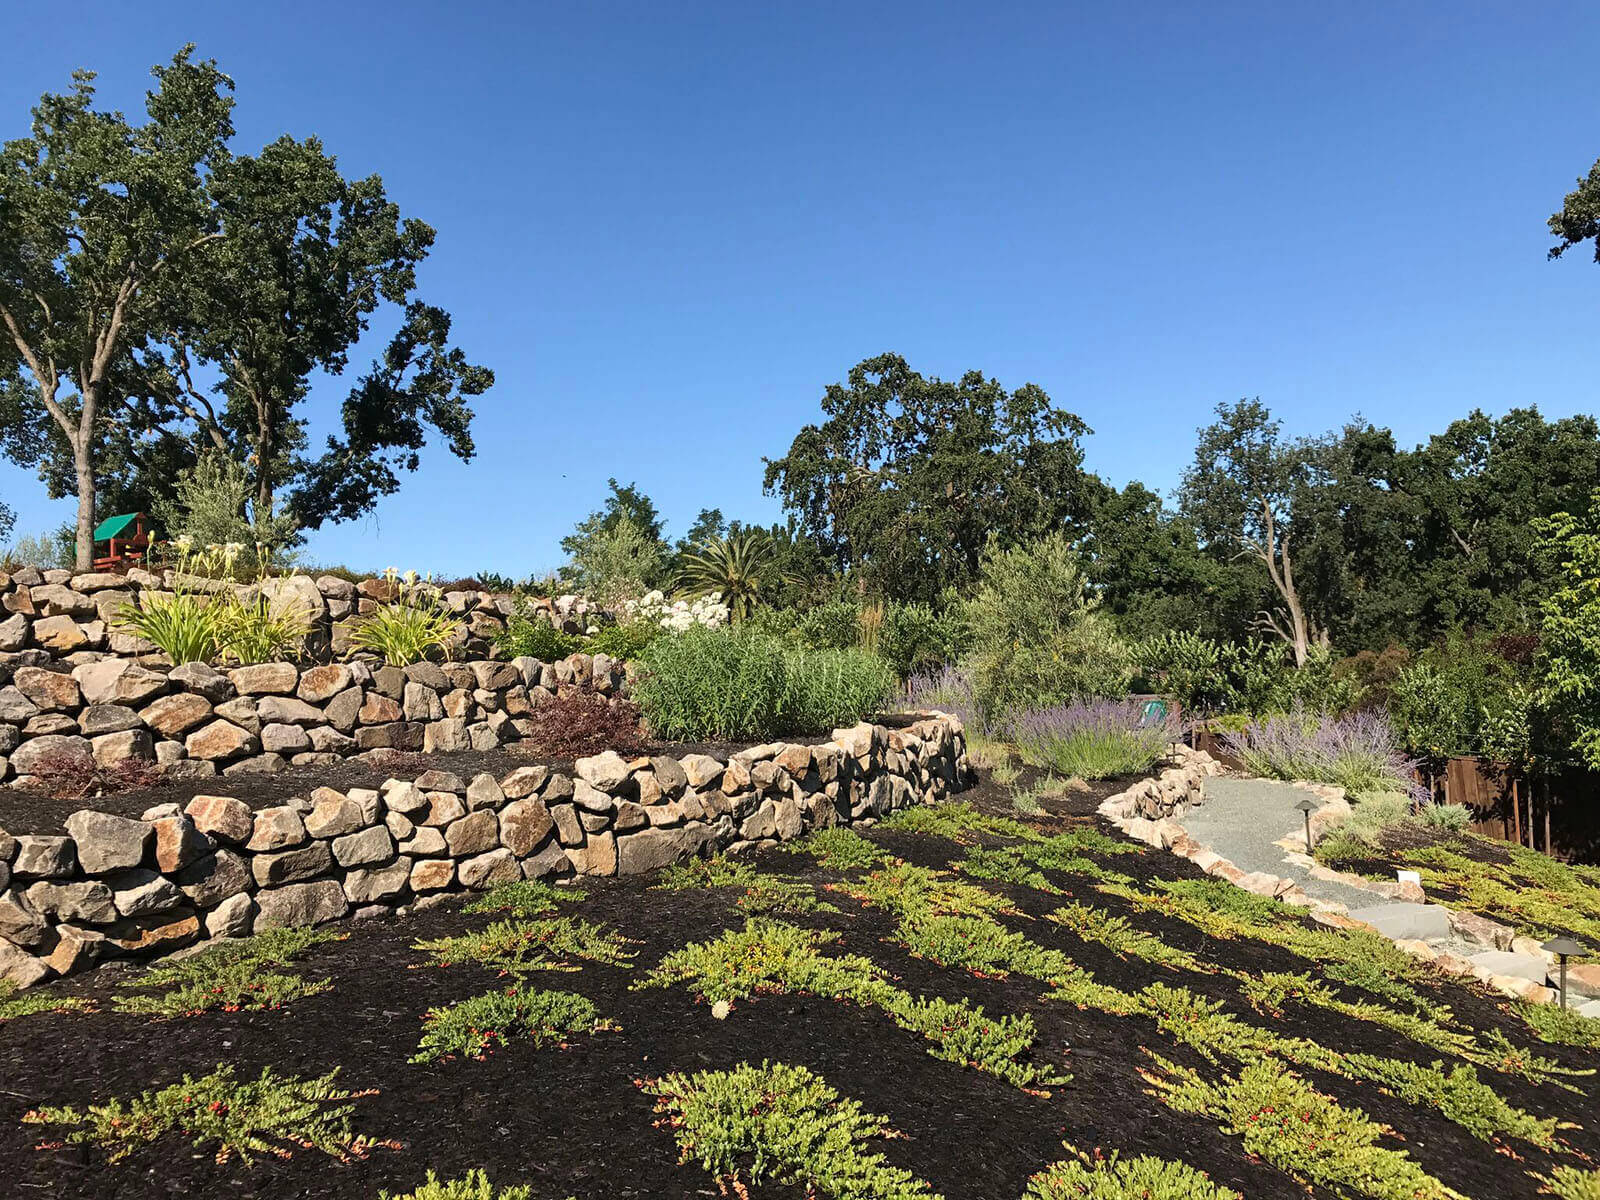 Multilevel gardening areas with rock walls and gravel pathways